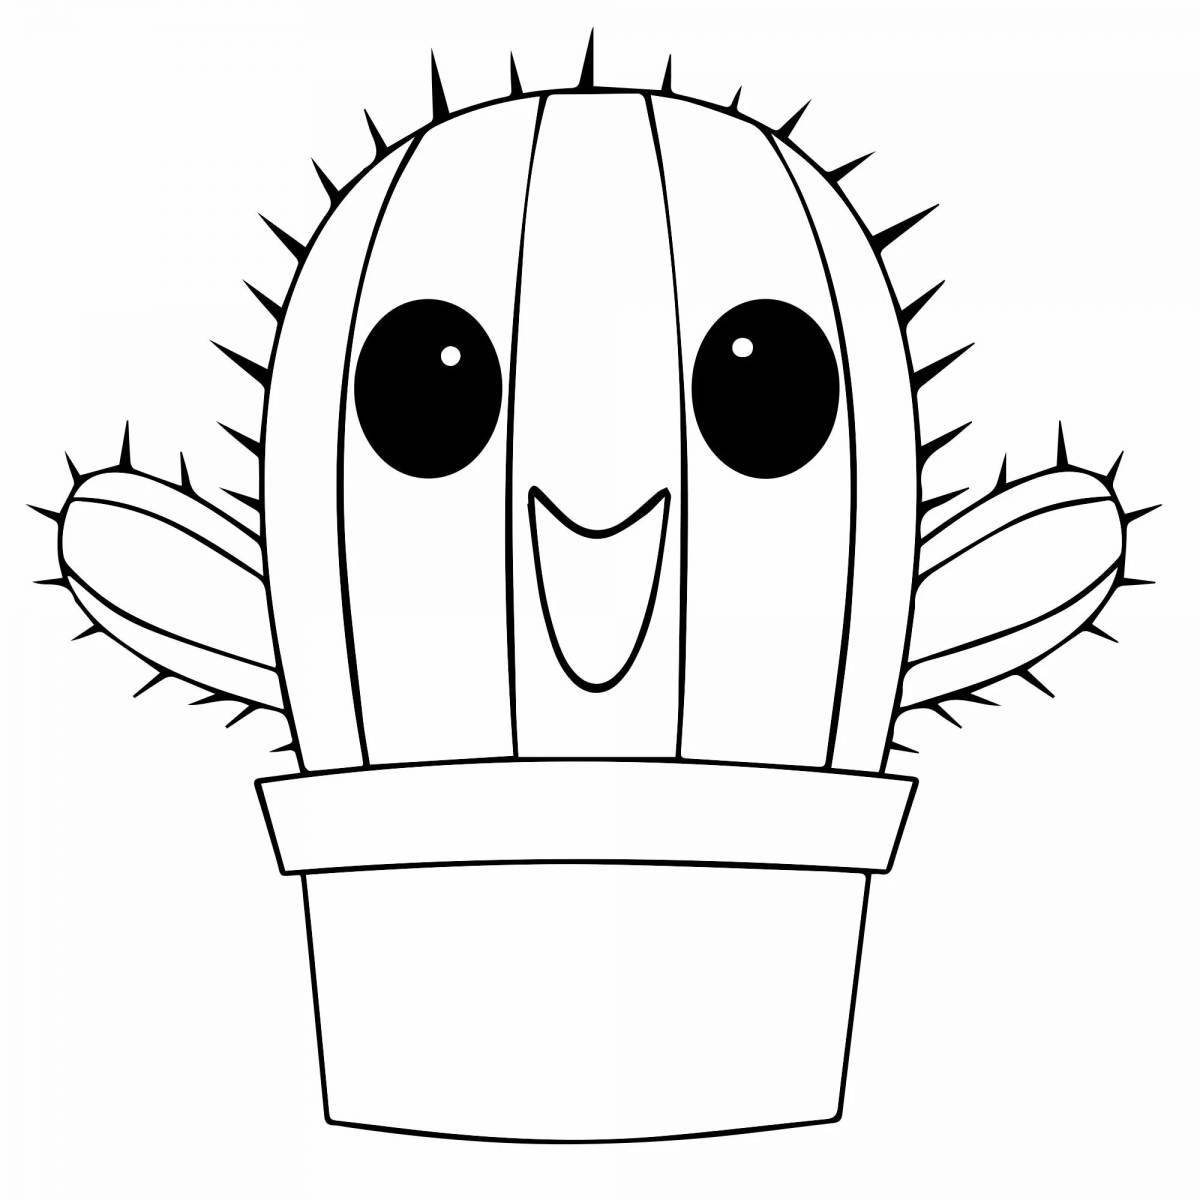 Little cactus in a pot for children